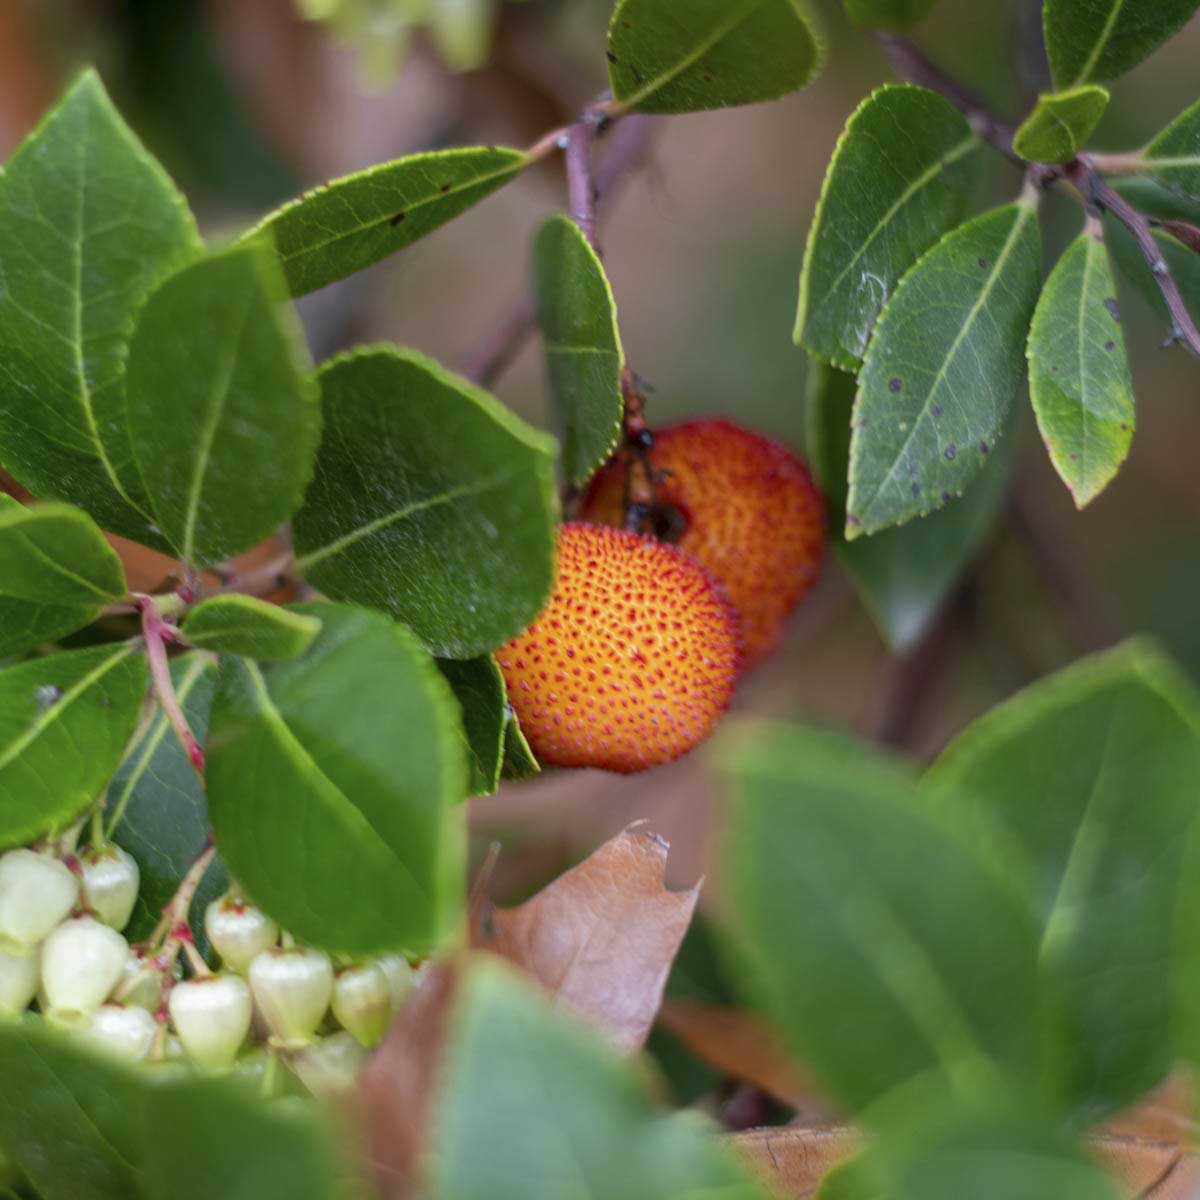 Ripe orange arbutus fruit with there fuzzy looking spikes hang from the tree.